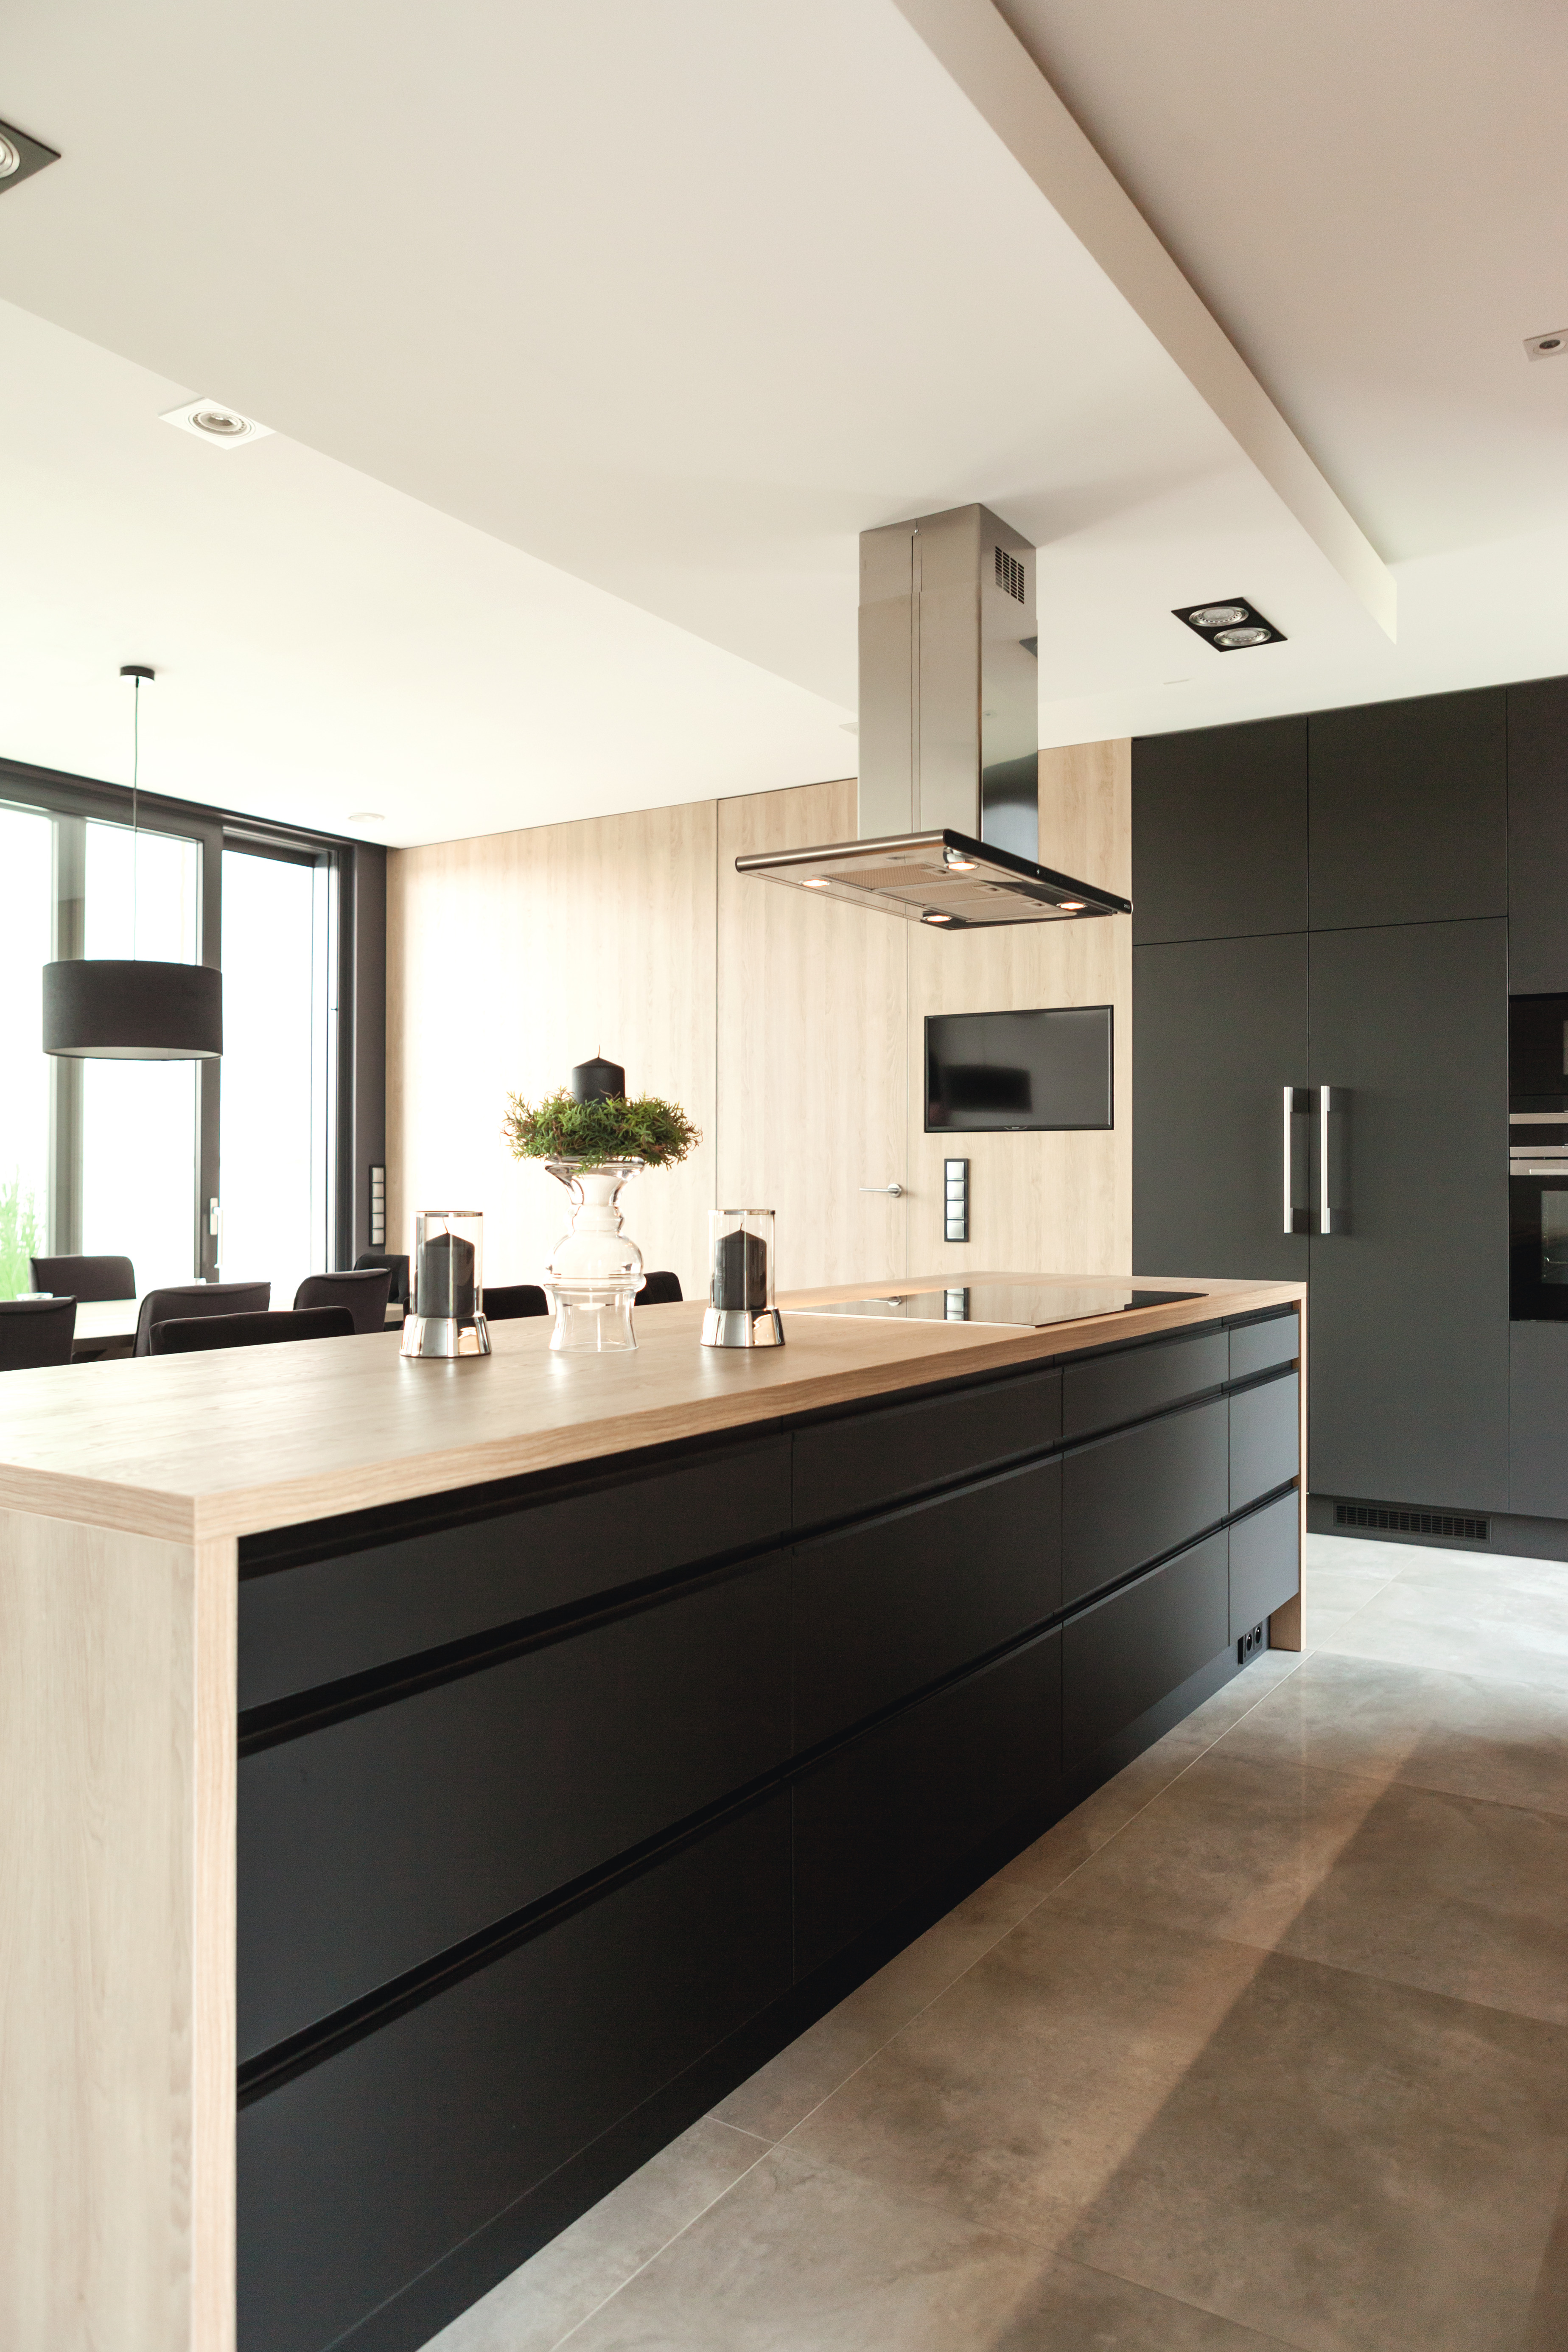 The U999 PM Black in PerfectSense Matt is in harmony with the naturalness of the H3309 ST28 Sand Gladstone Oak.